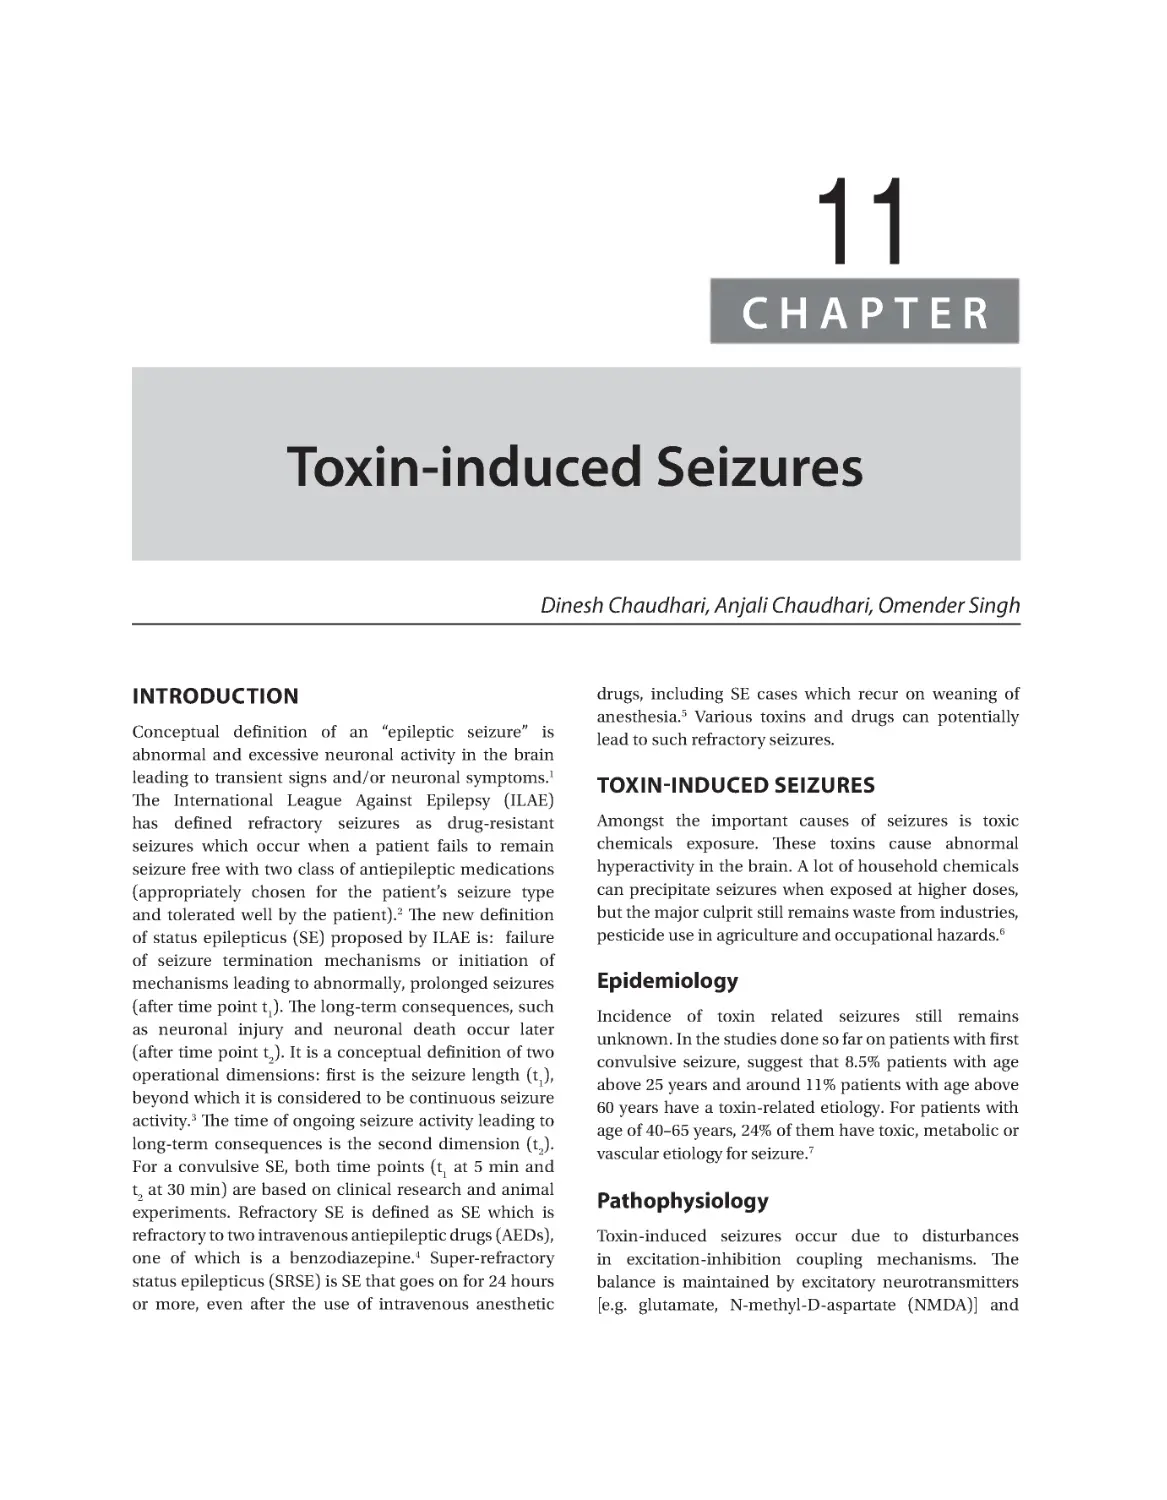 Chapter 11: Toxin-induced Seizures